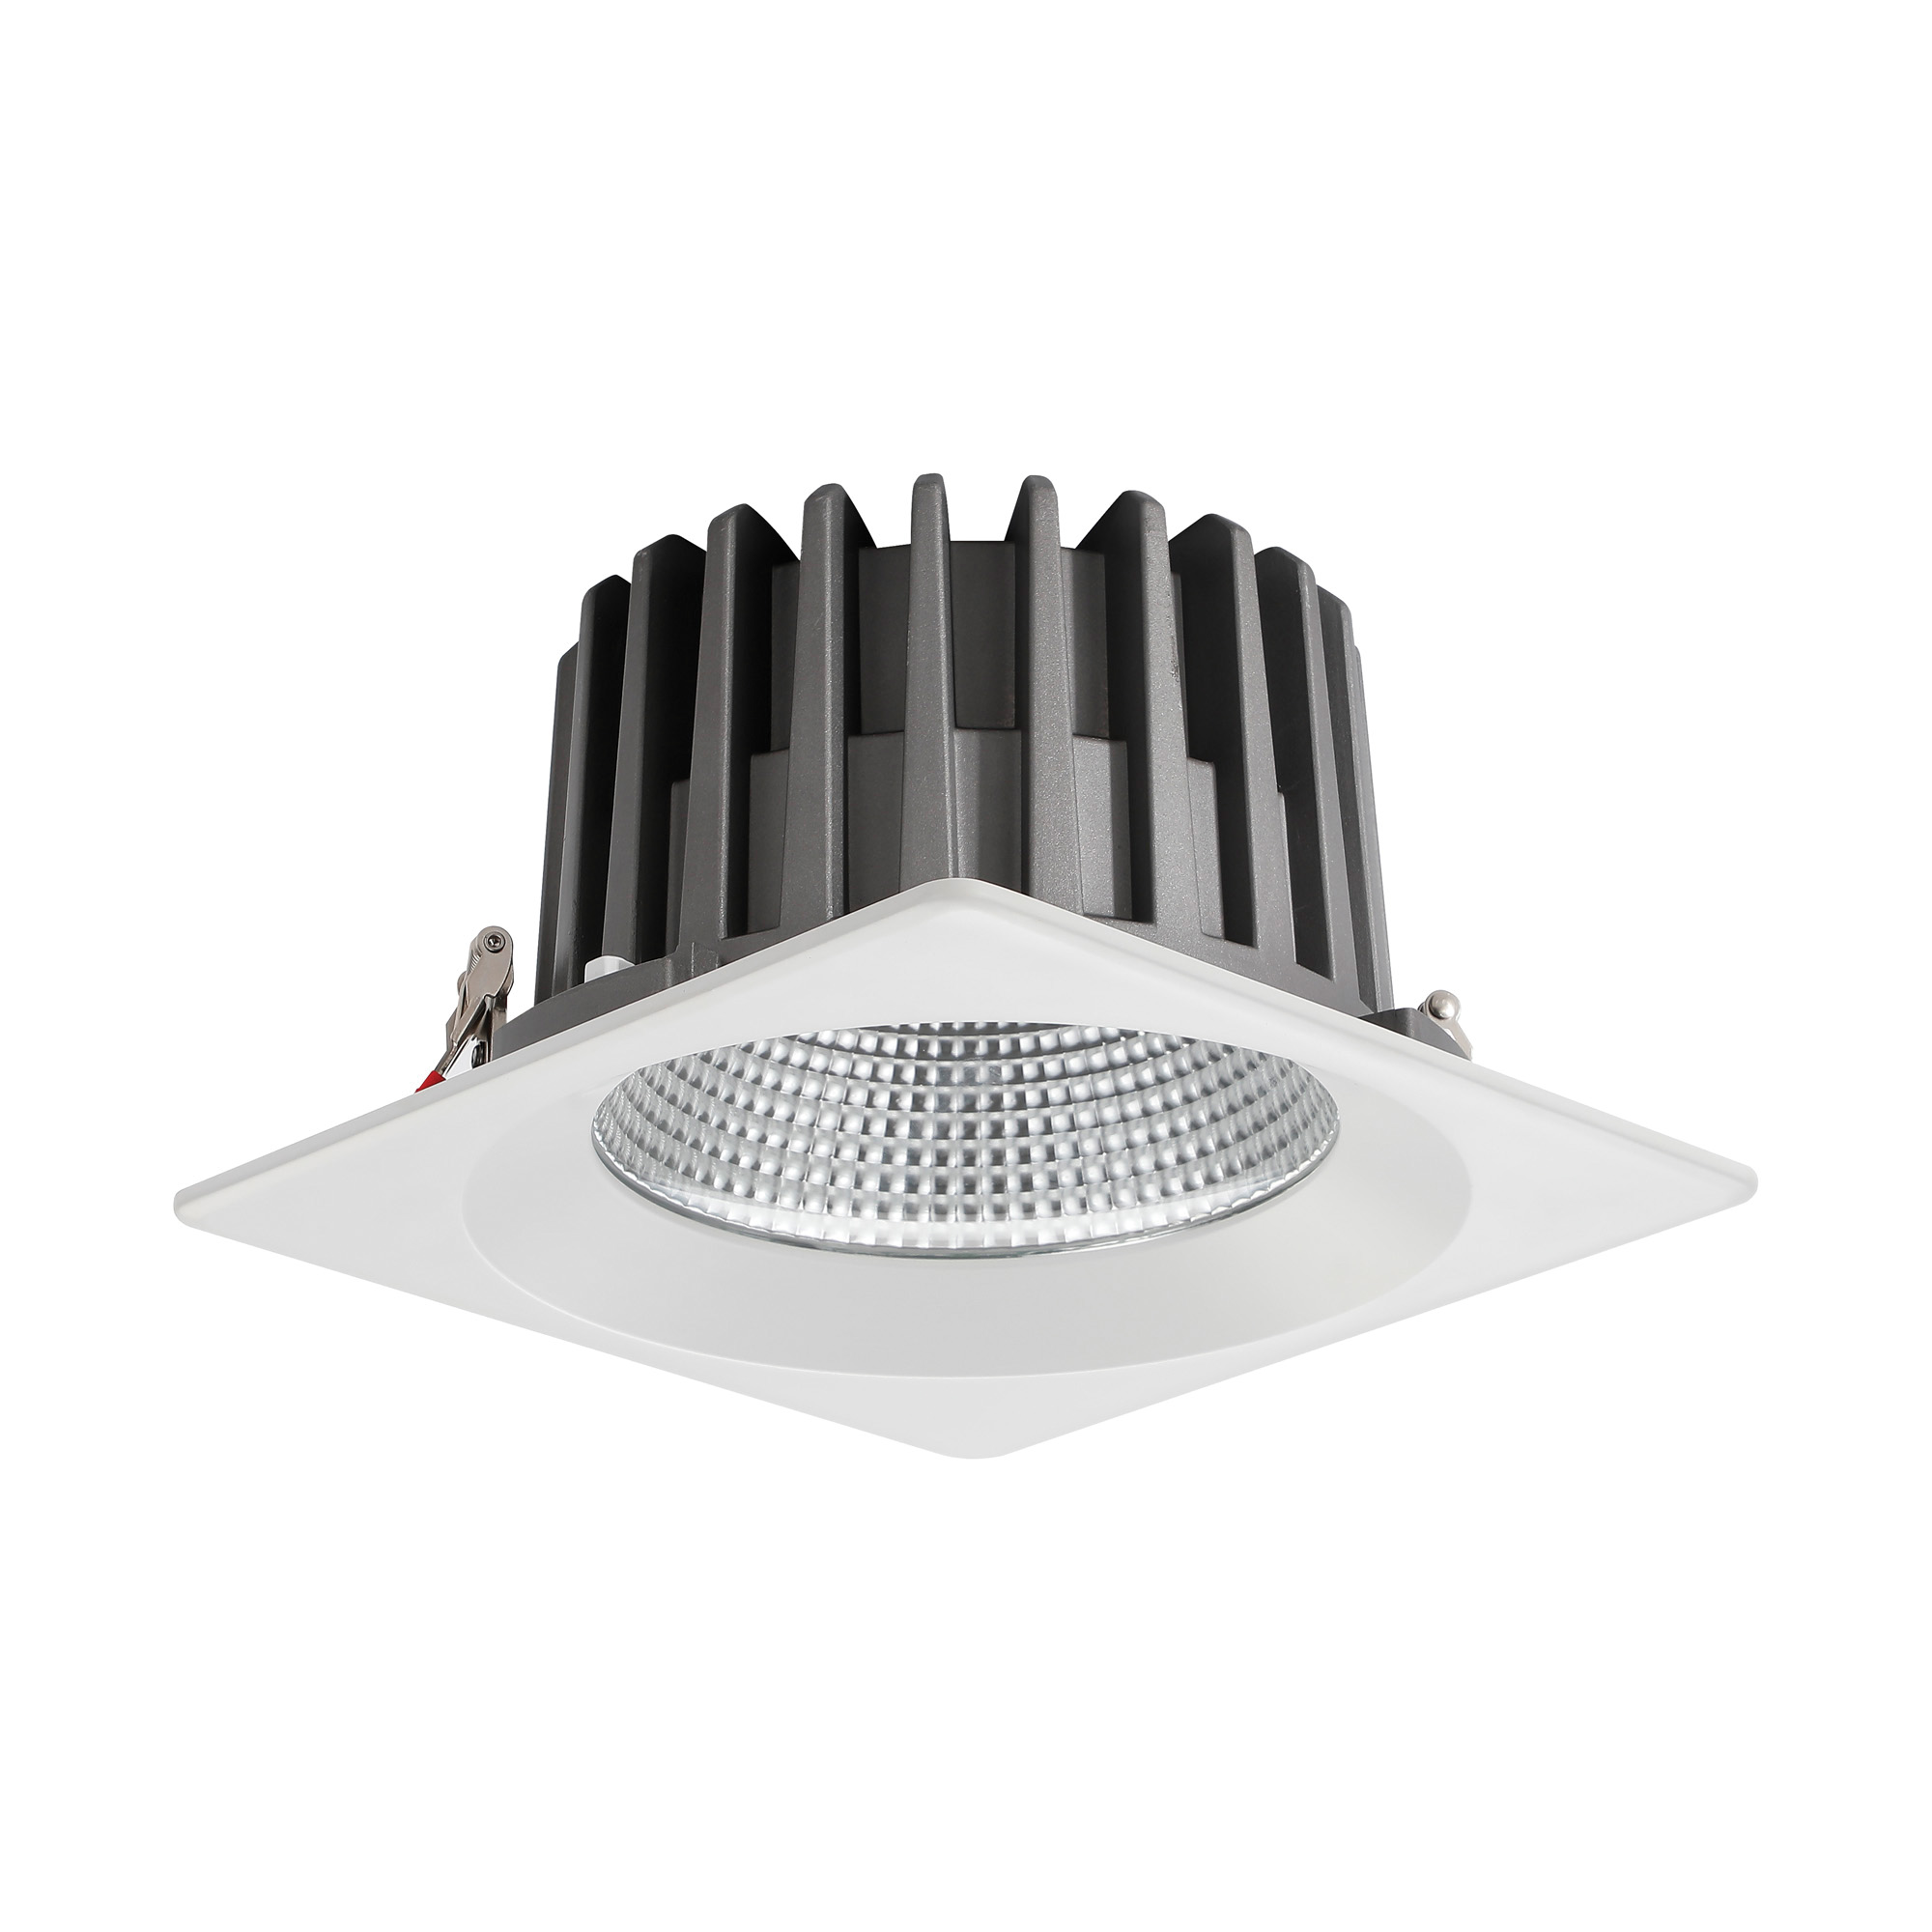 DL200082  Bionic 50; 50W; 1200mA; White Deep Square Recessed Downlight; 4380lm ;Cut Out 175mm; 50° ; 3000K; IP44; DRIVER INC.; 5yrs Warranty.